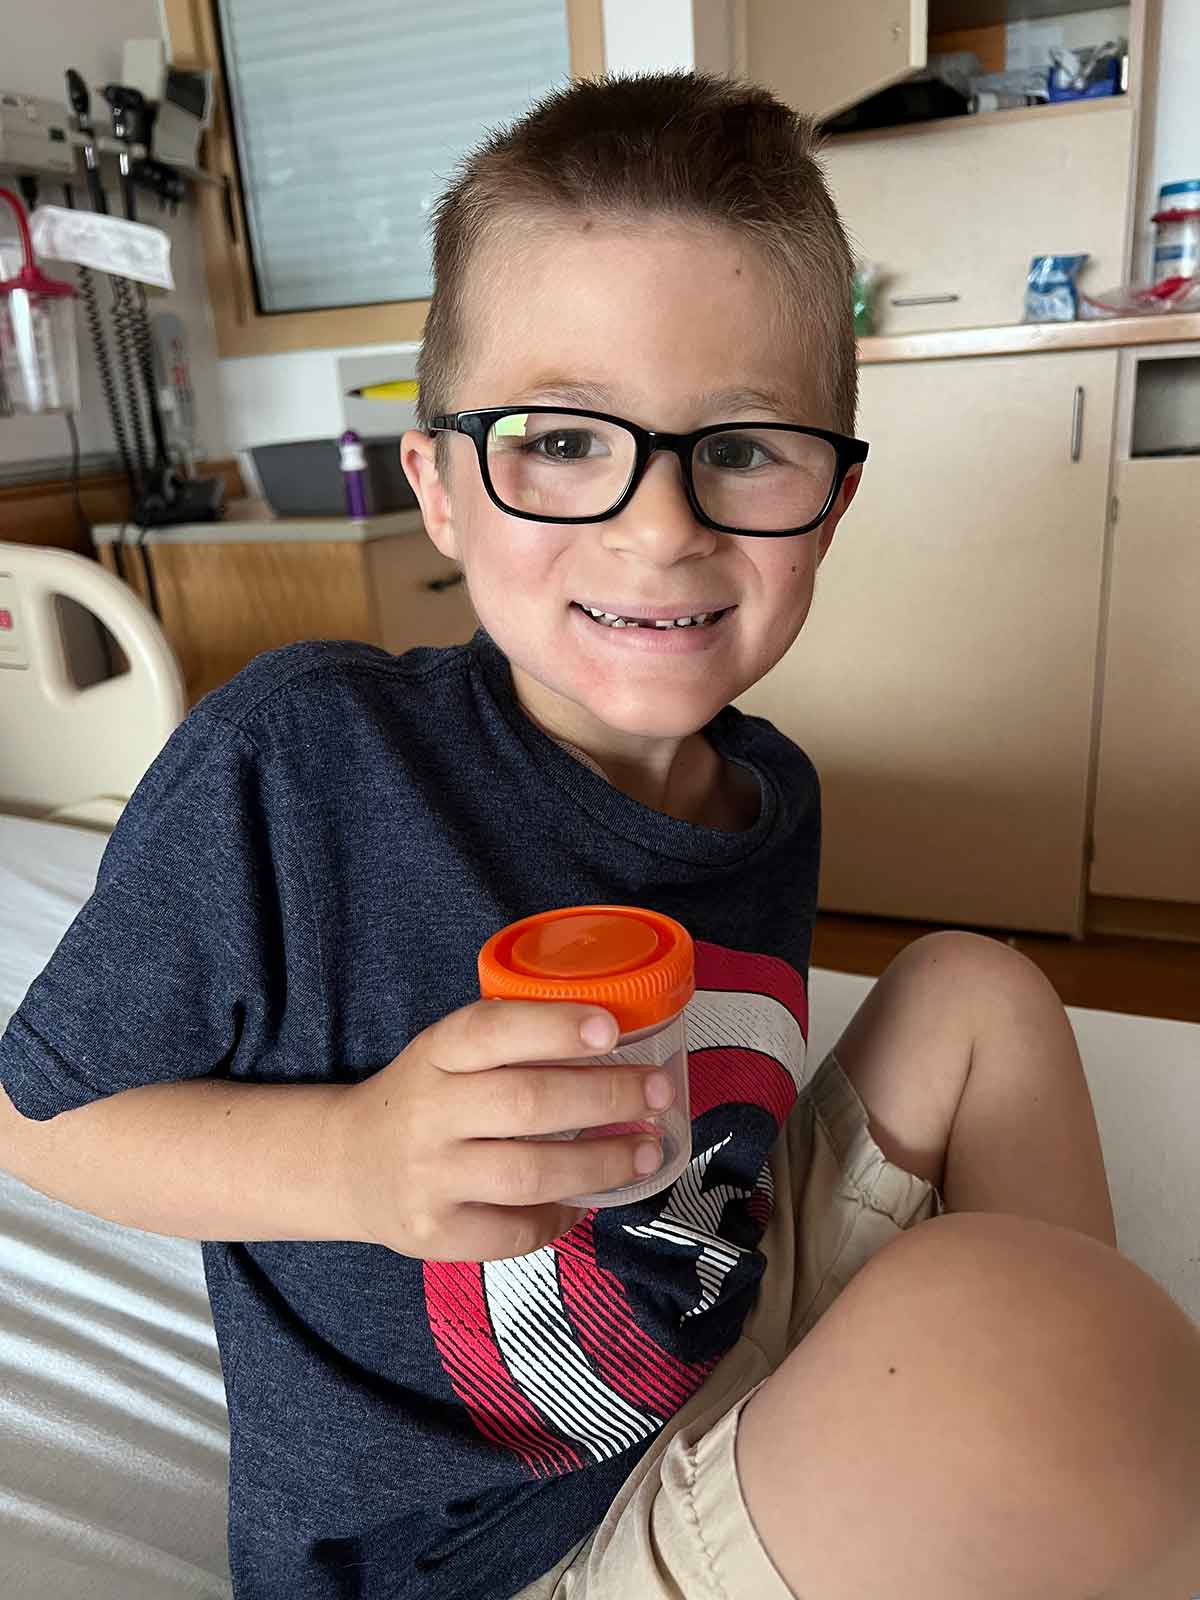 Little boy sitting in a hospital bed holding a cup.